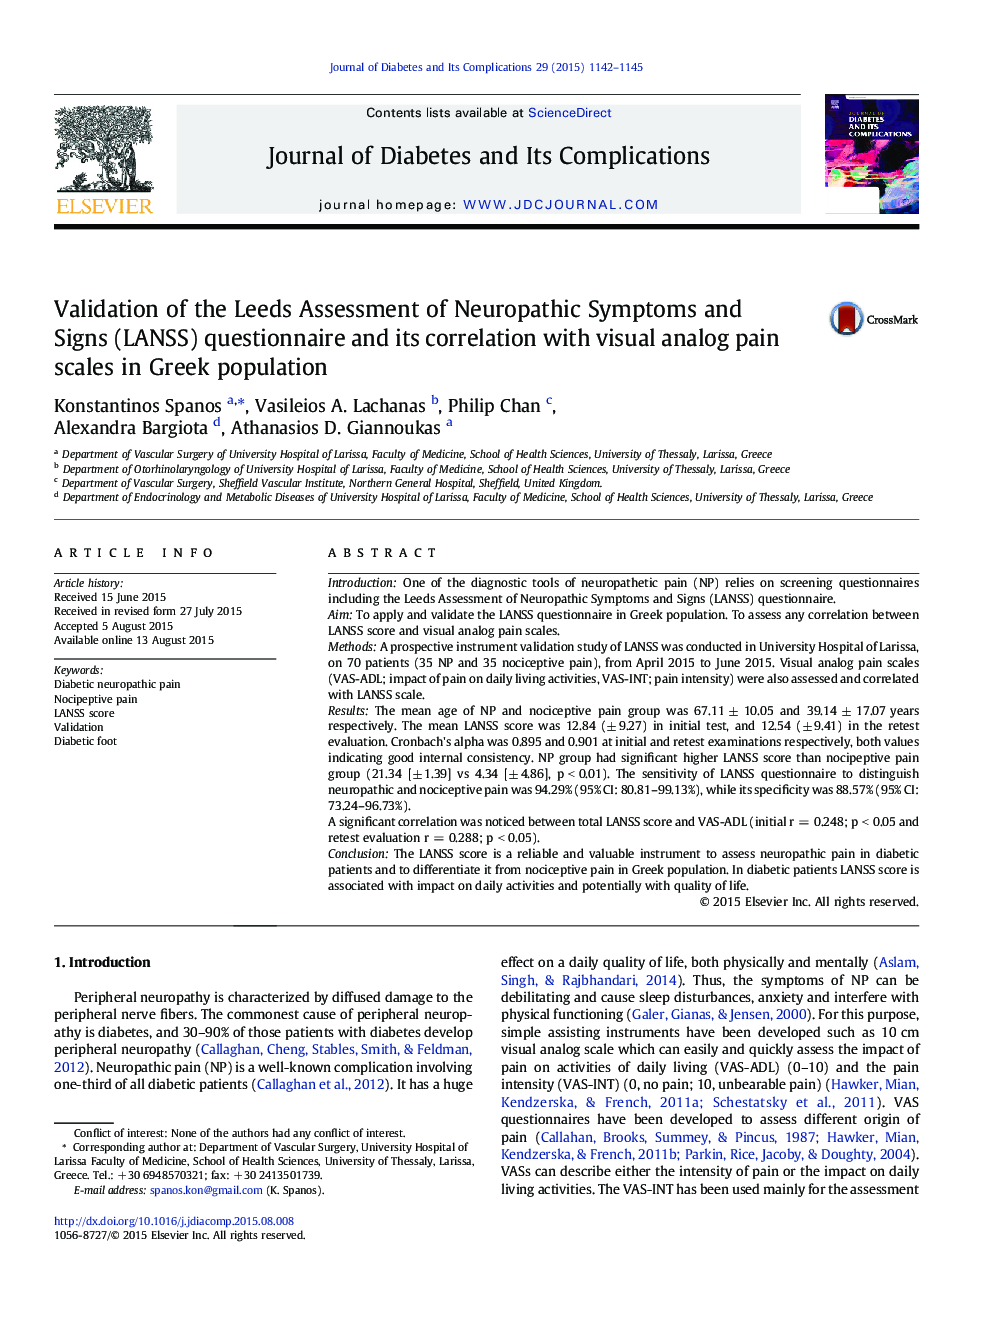 Validation of the Leeds Assessment of Neuropathic Symptoms and Signs (LANSS) questionnaire and its correlation with visual analog pain scales in Greek population